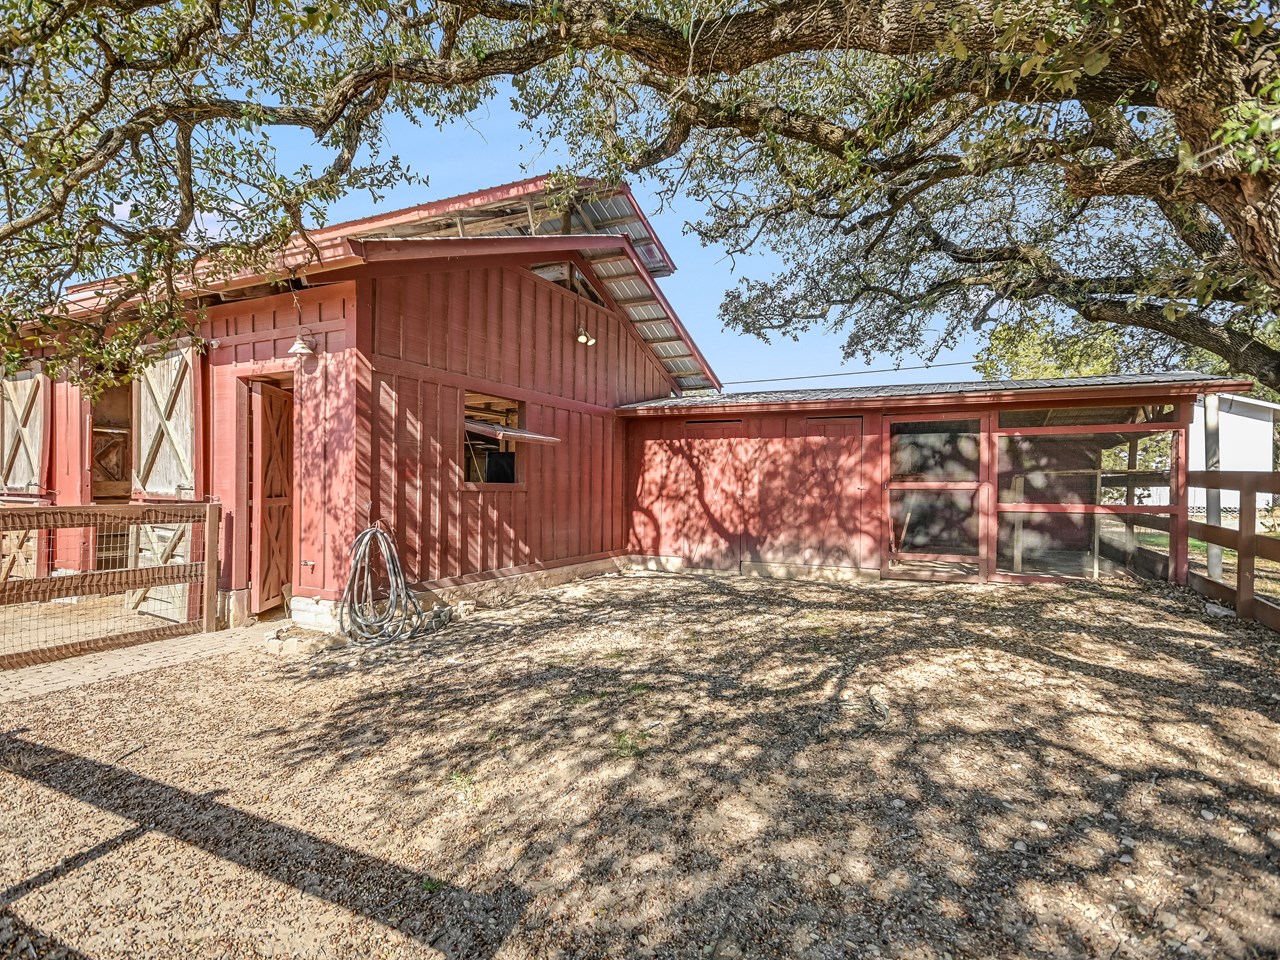 unbelievable barn with run stalls, checken coop, electrical, plumbing and even a bathroom!